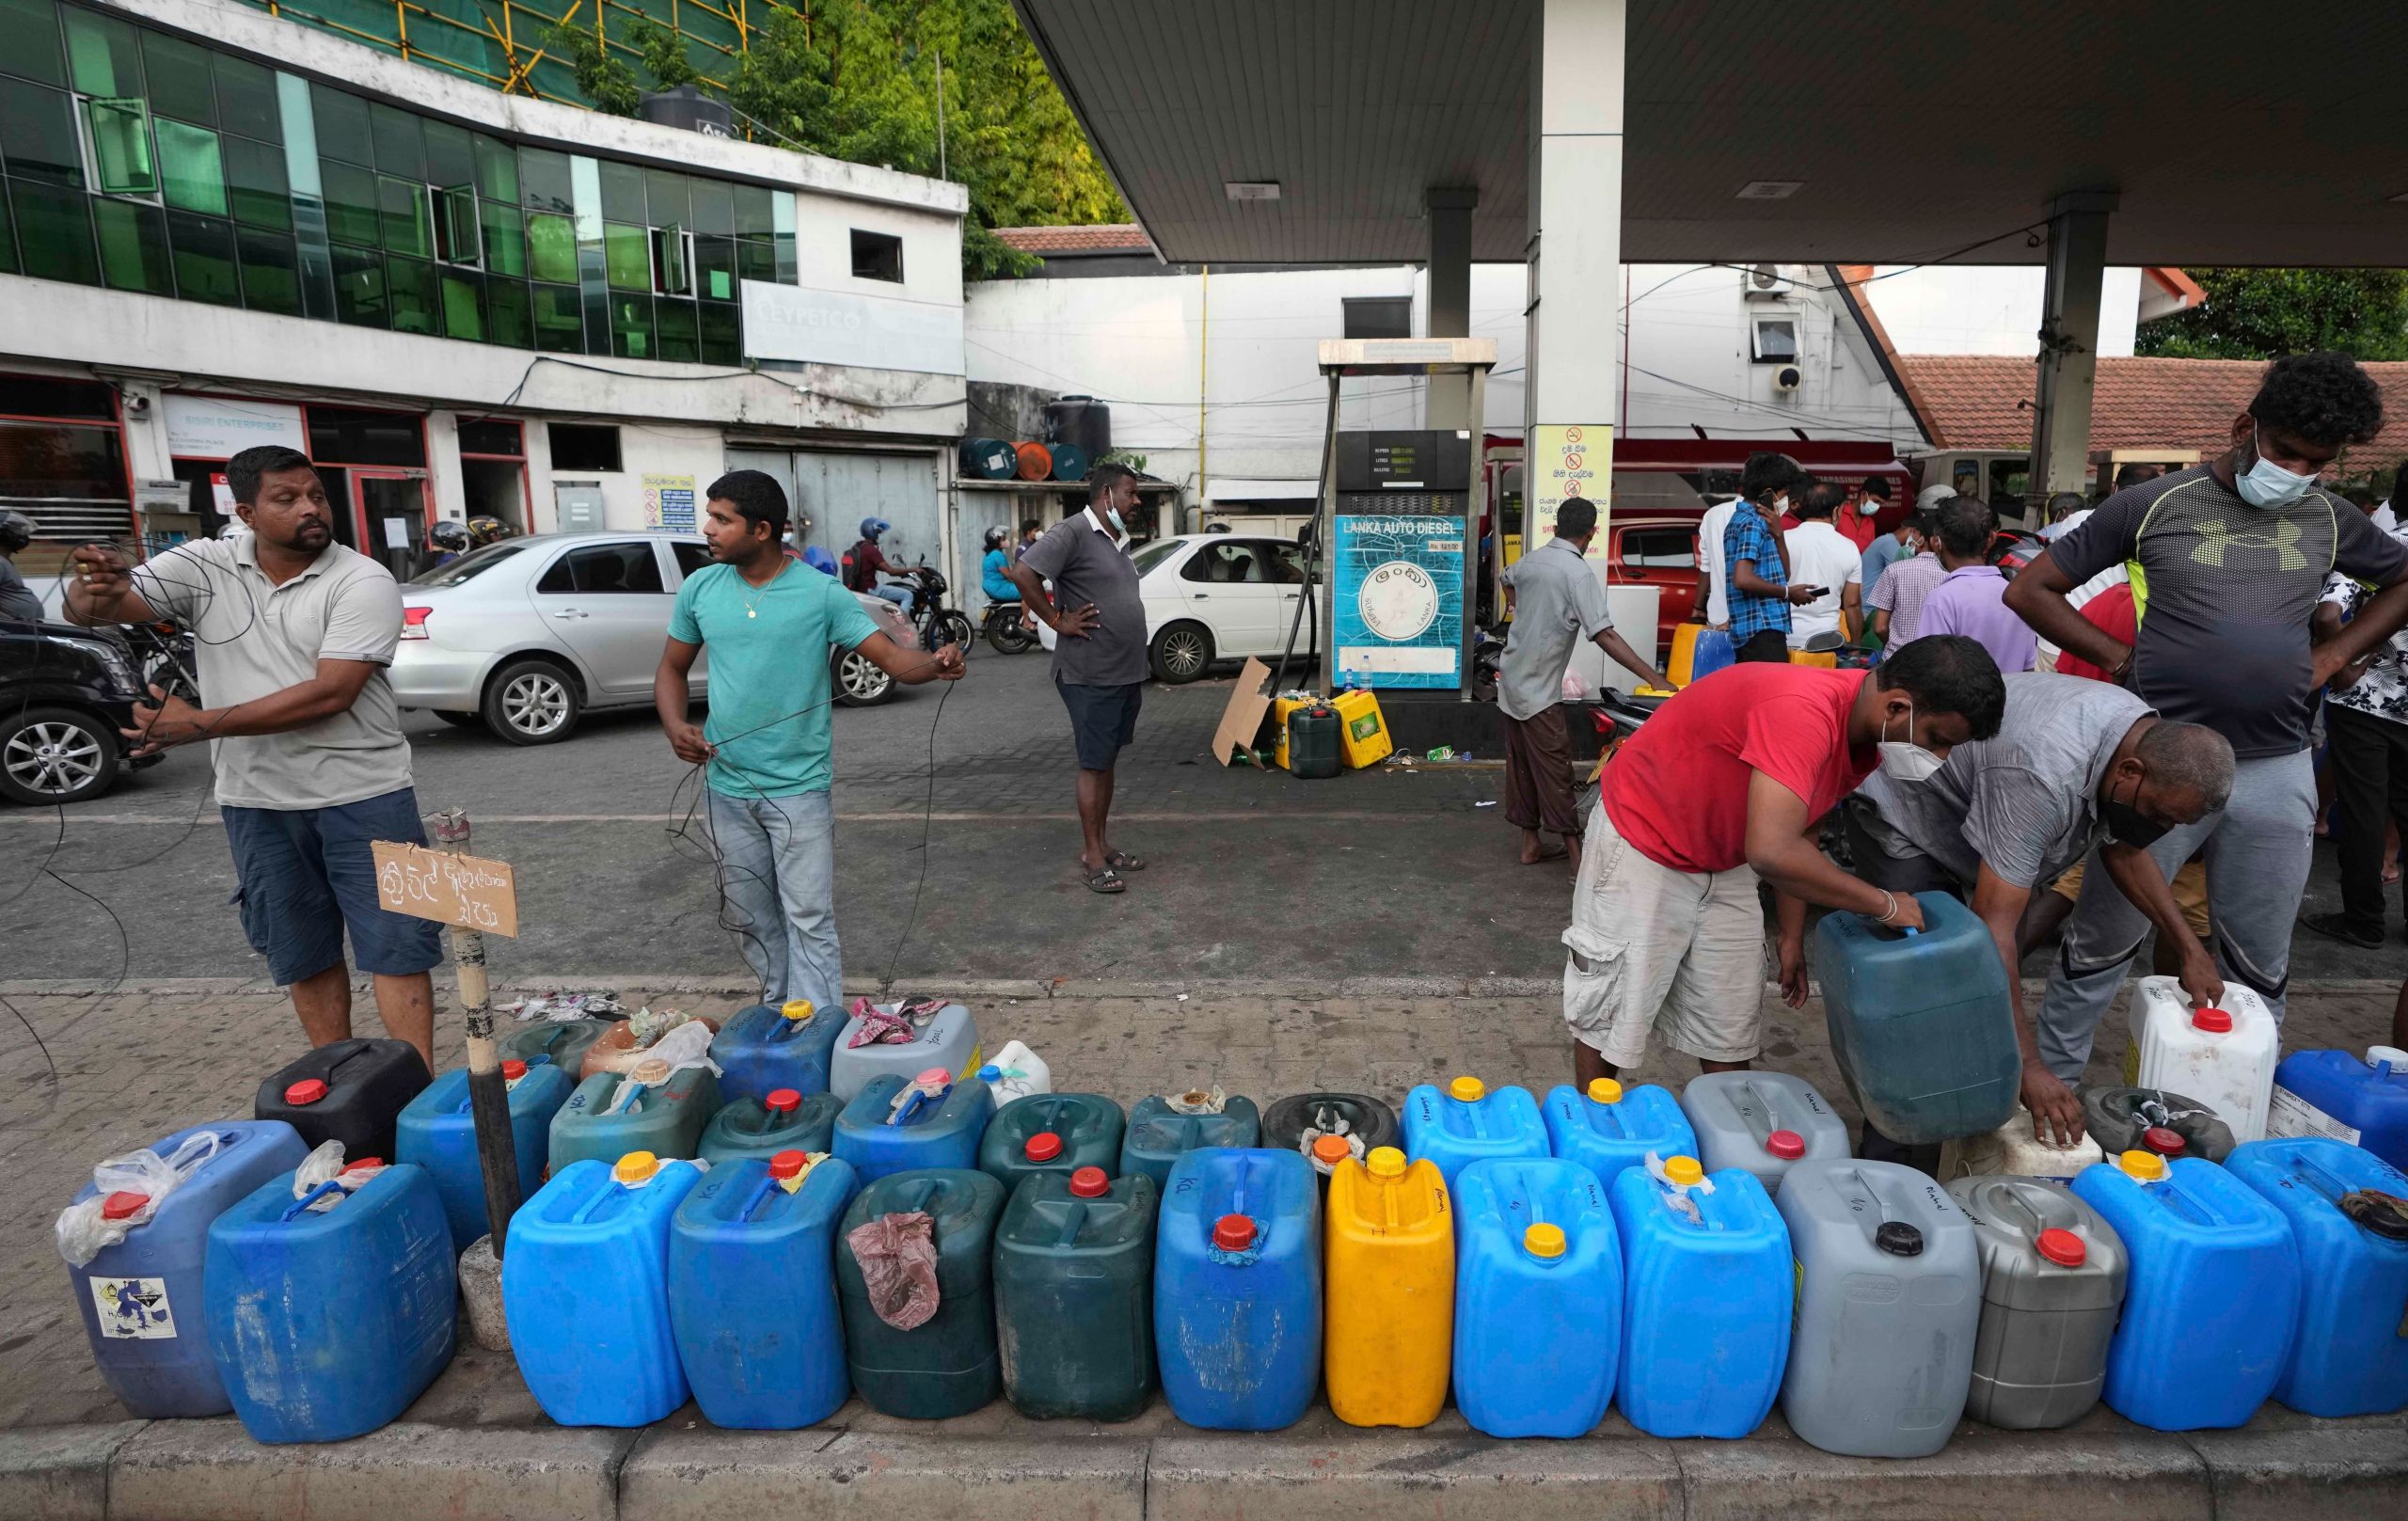 Protesters burn tyres, block roads as Sri Lanka faces fuel shortage, price hikes